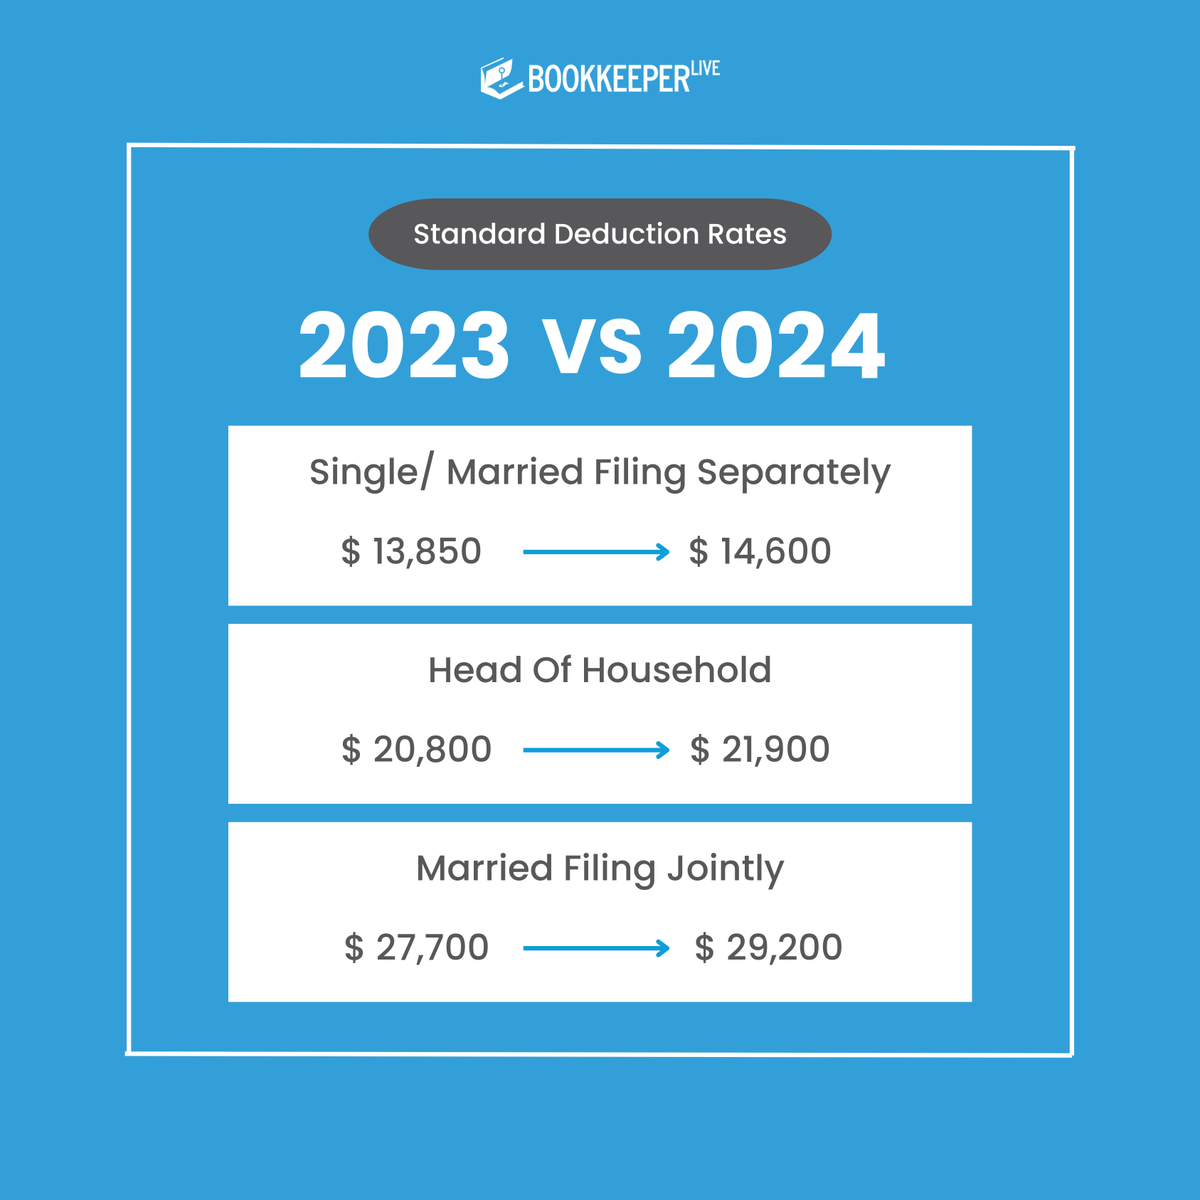 The standard deduction provides a straightforward method to lower your taxable income on your #taxreturn, as it involves claiming a predetermined flat dollar amount set by the IRS.

Follow - @bookKeeper_live

#standarddeductionrates #2023vs2024 #deductionrates #taxfiling #usatax